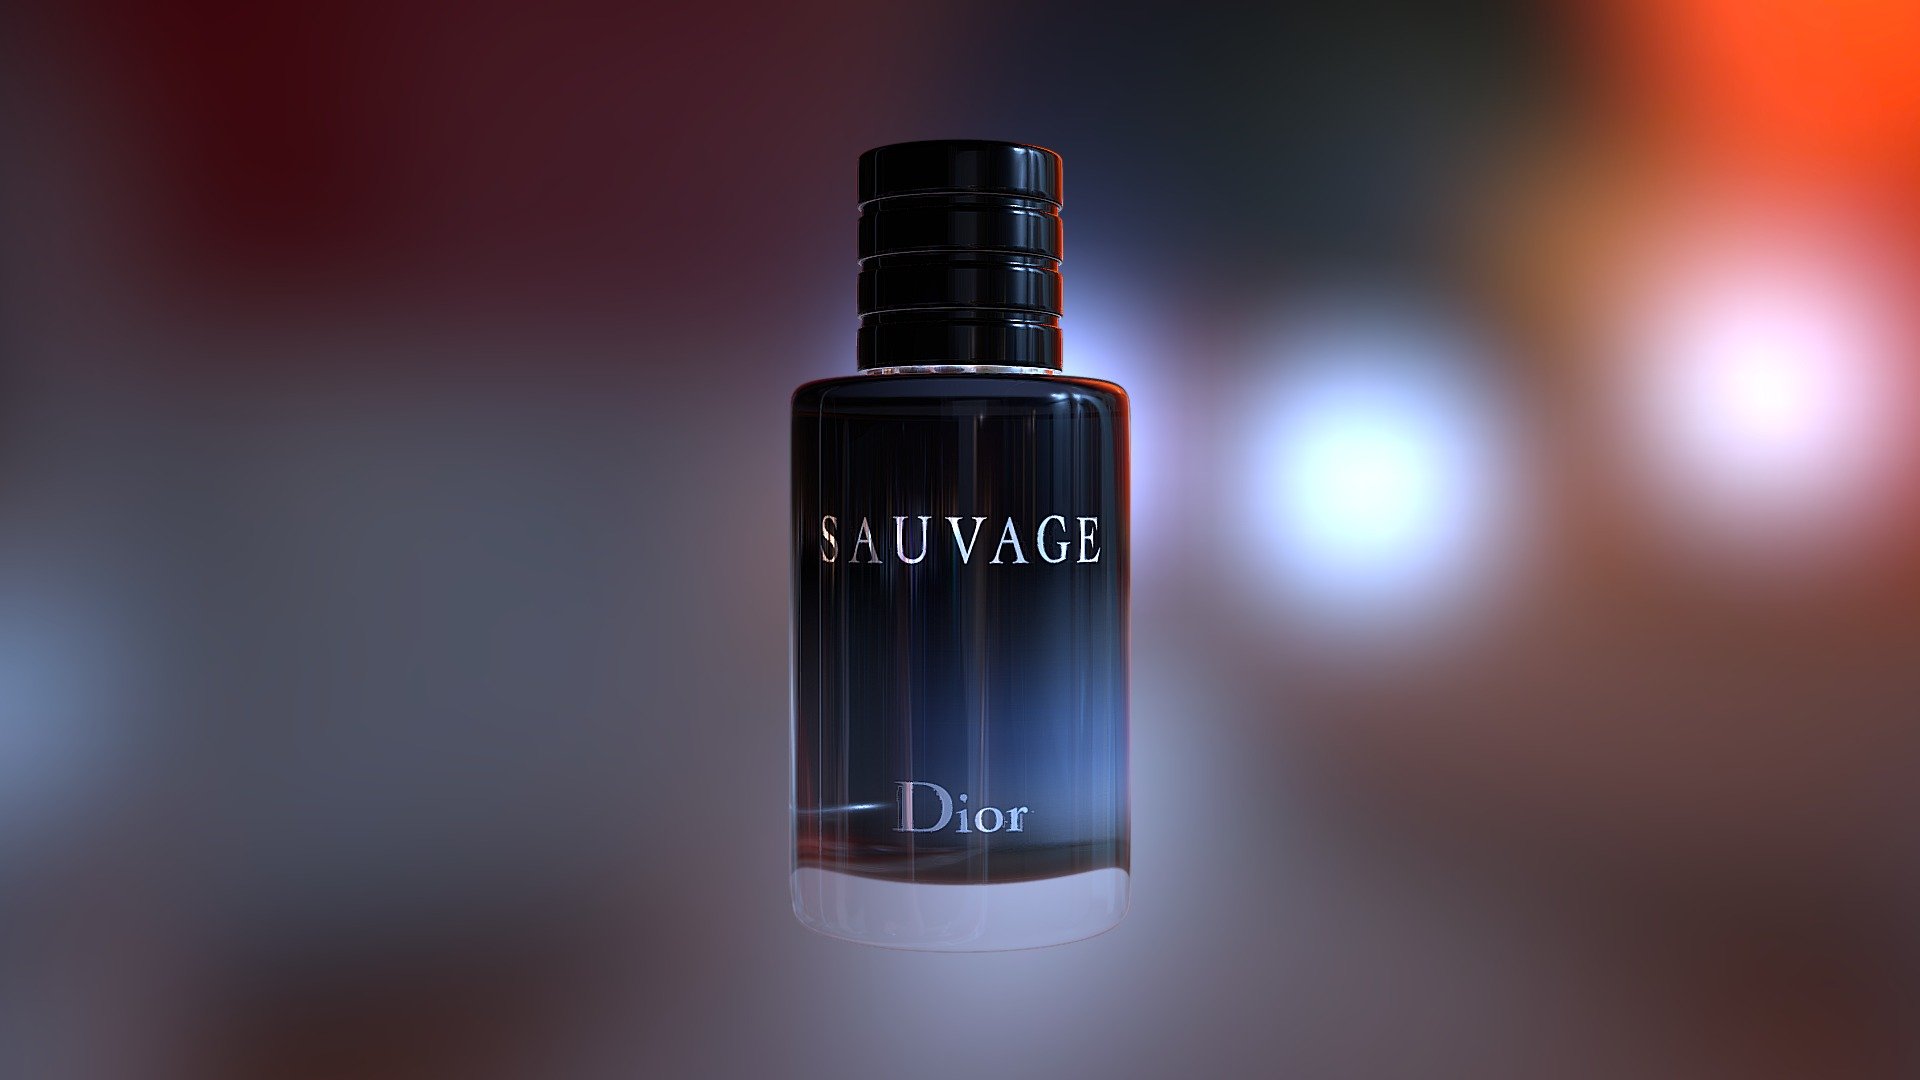 Dior Sauvage v2 - 3D model by cgourdeaudior 3d model